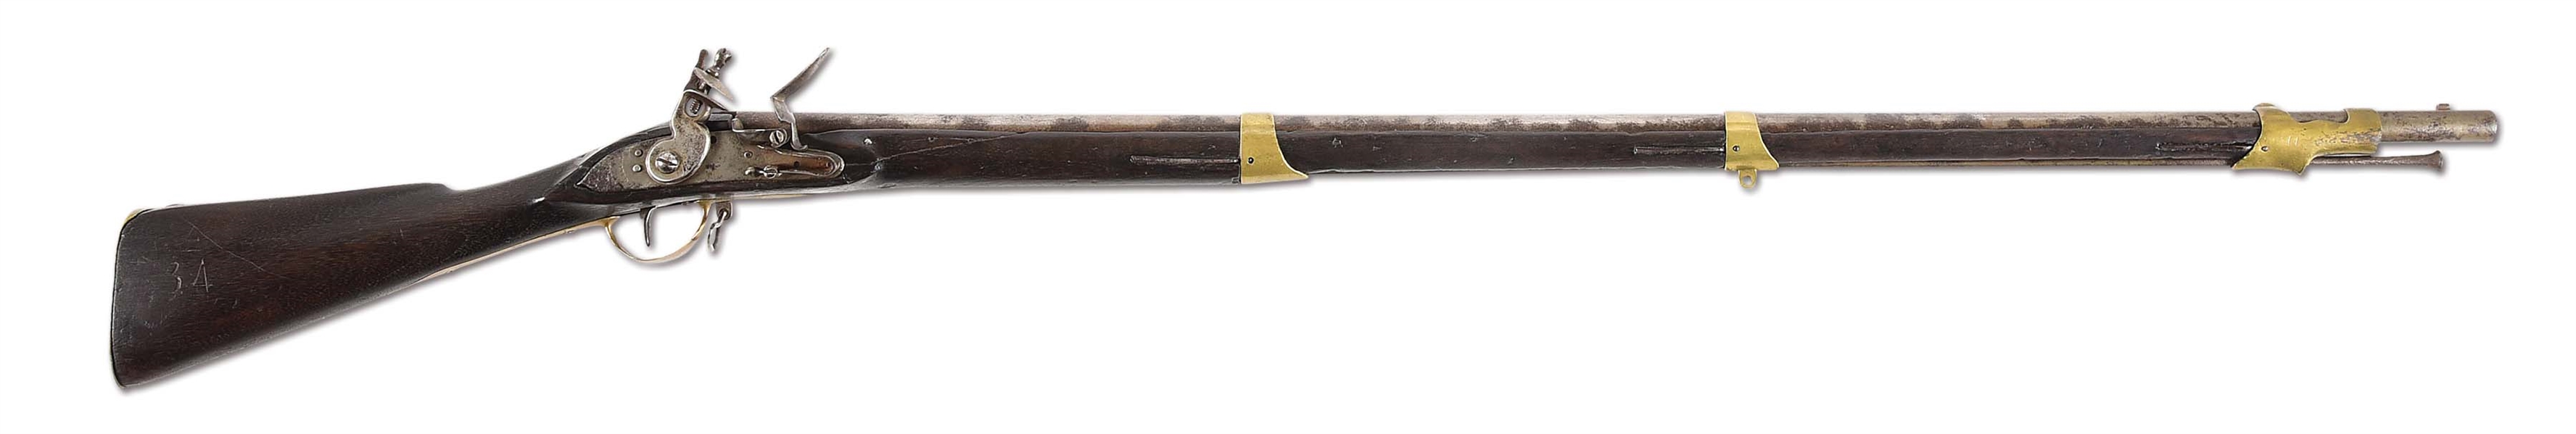 (A) US MUSKET FOR MARINES, MODEL OF 1797.